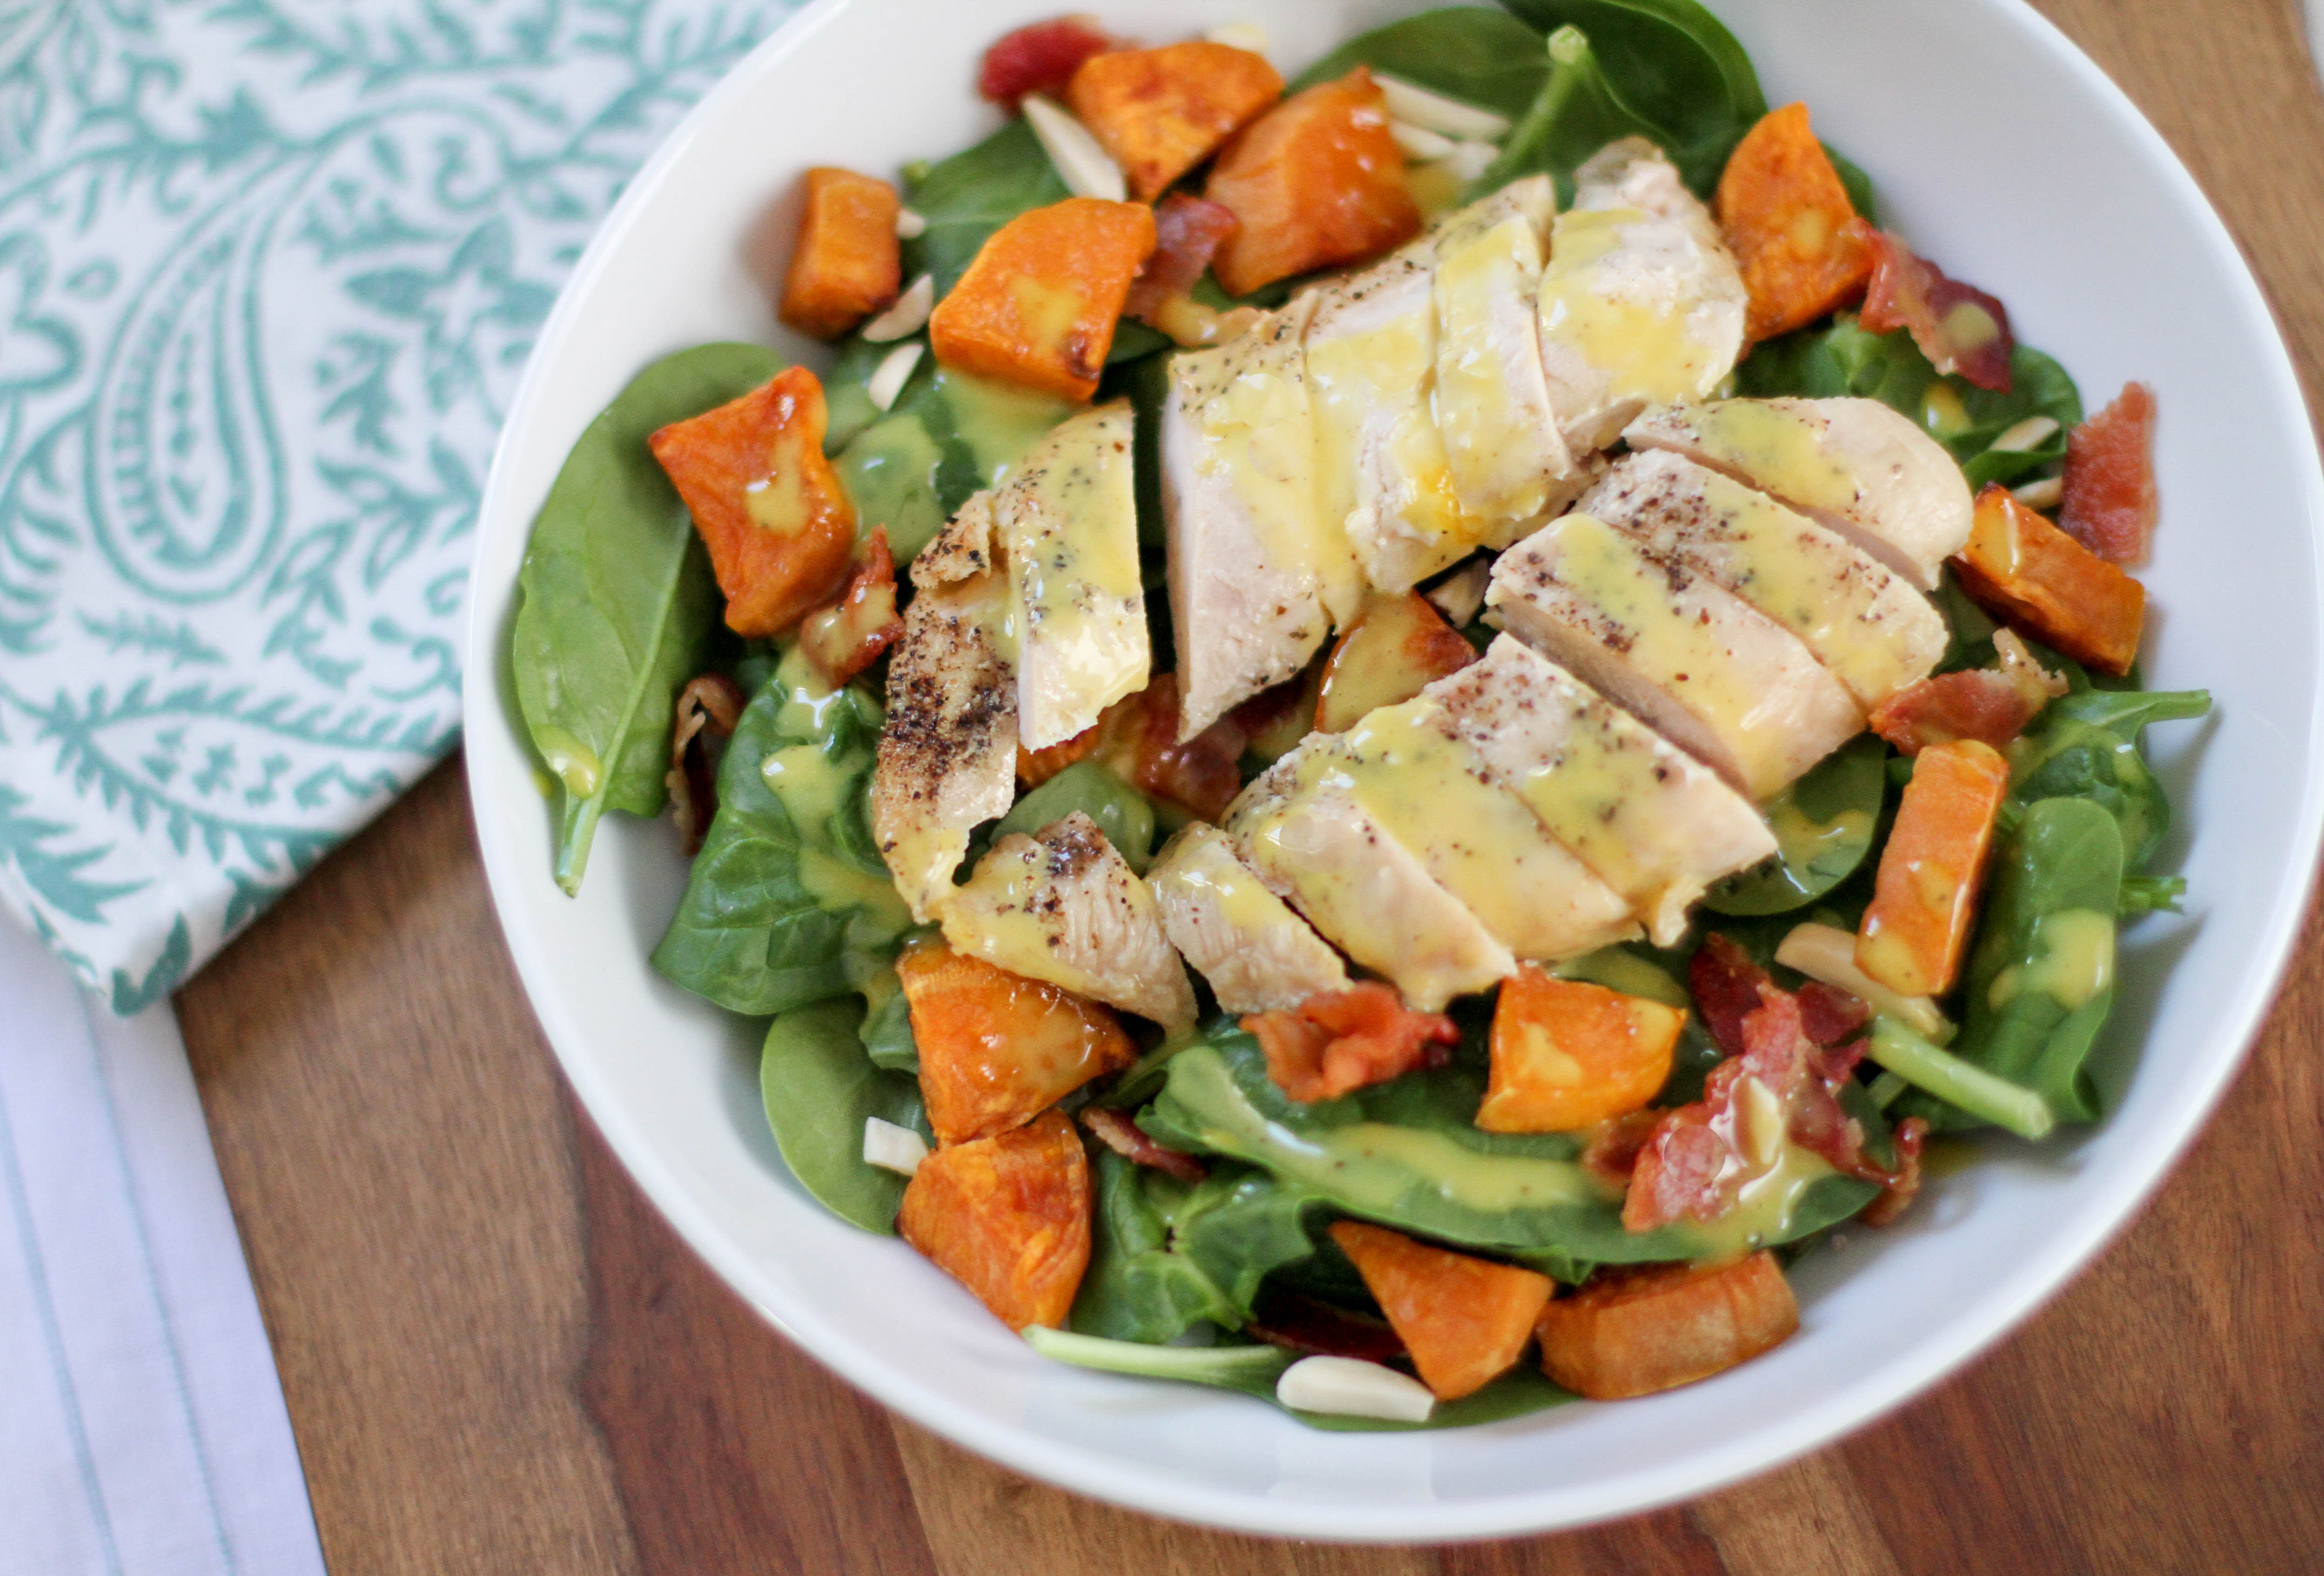 Roasted Sweet Potato and Chicken Salad with Honey Mustard Dressing